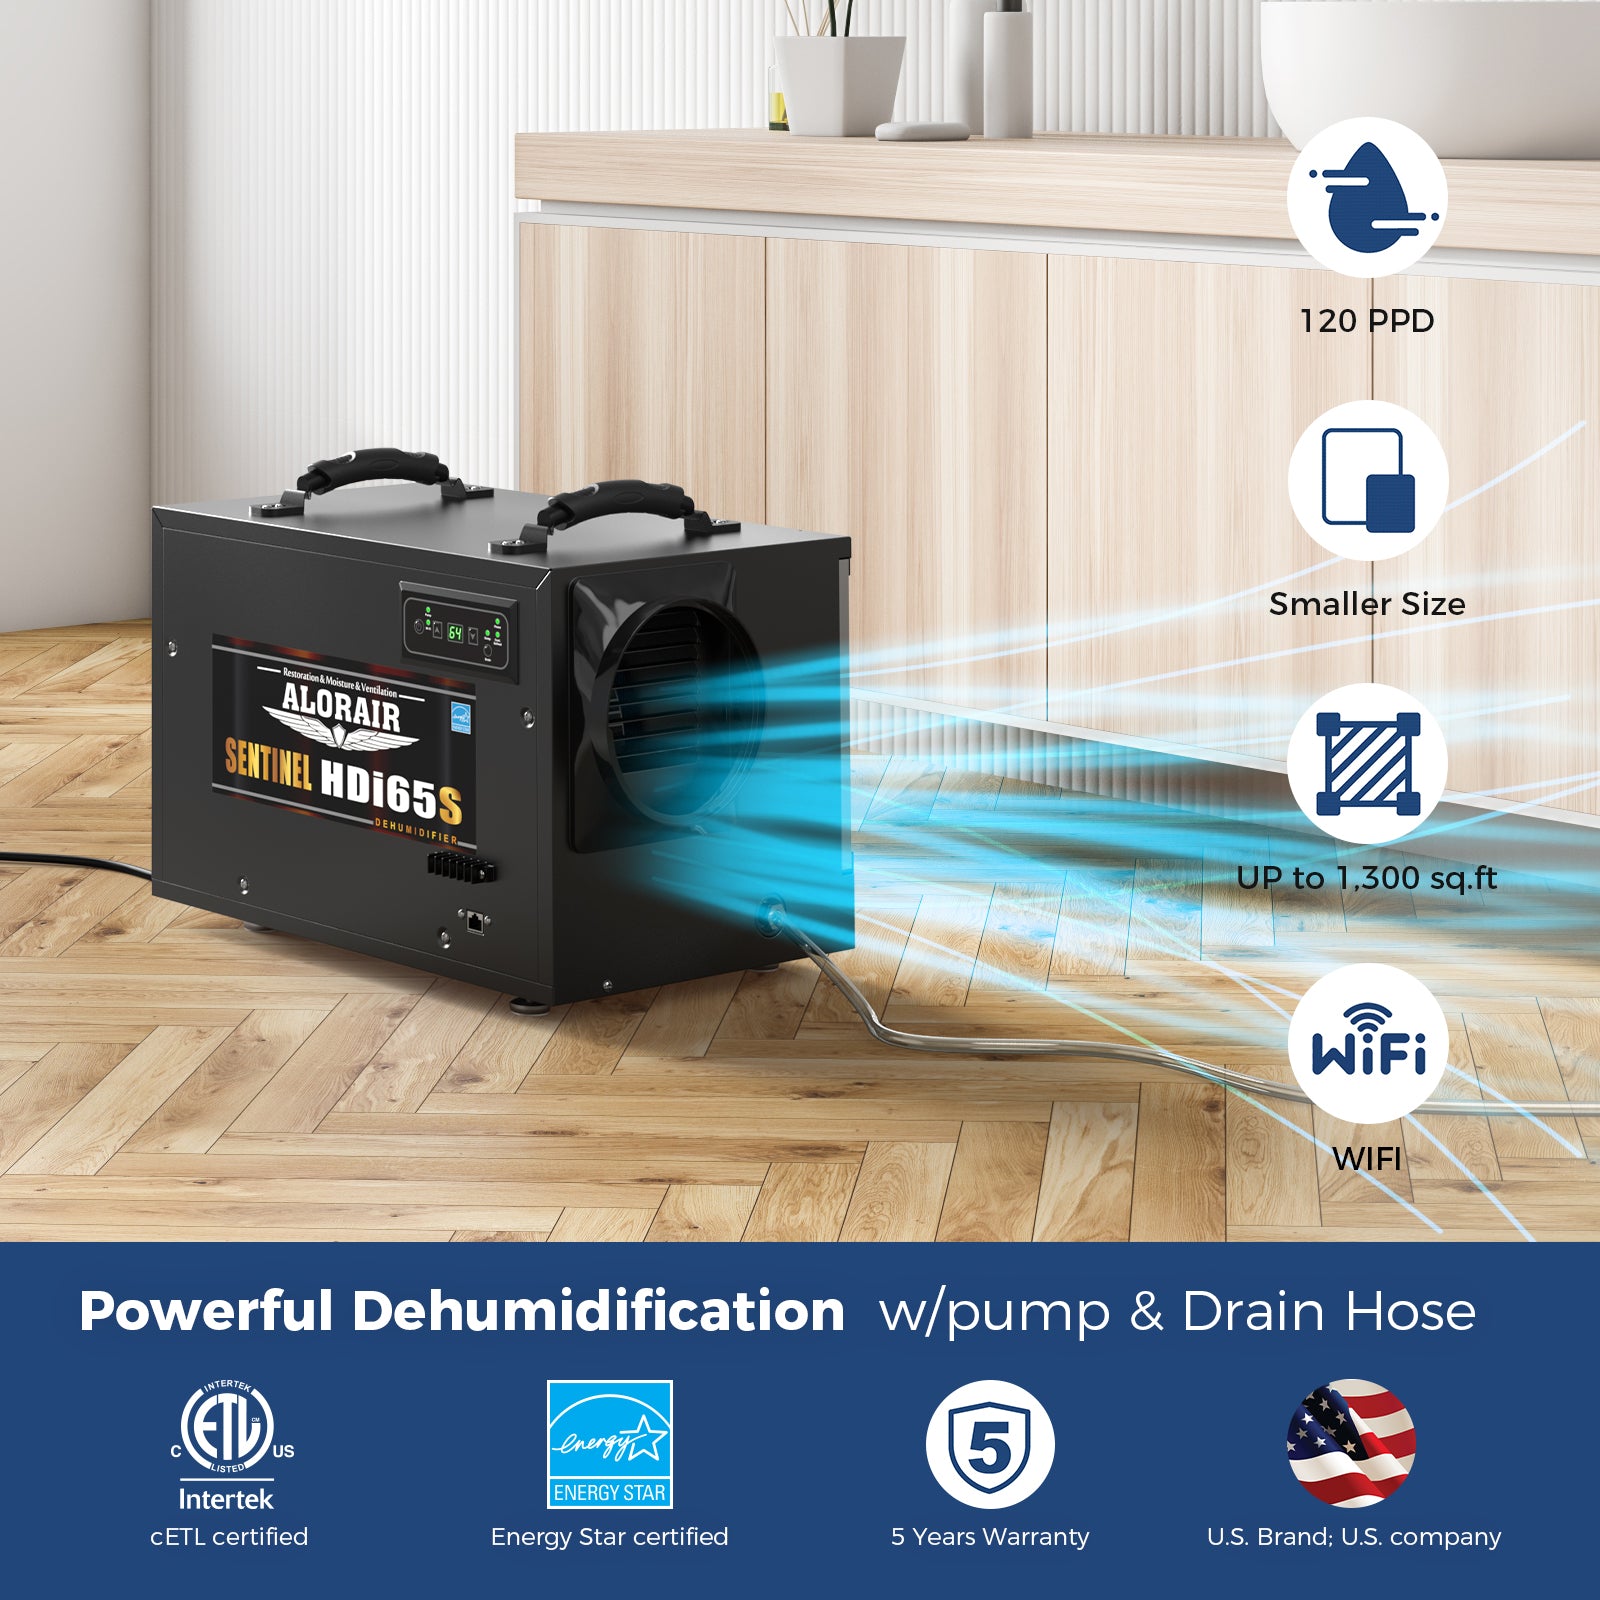 AlorAir 120 PPD Crawl Space Dehumidifiers with Pump | Sentinel HDi65S Black WIFI | Size for 1300 sq.ft